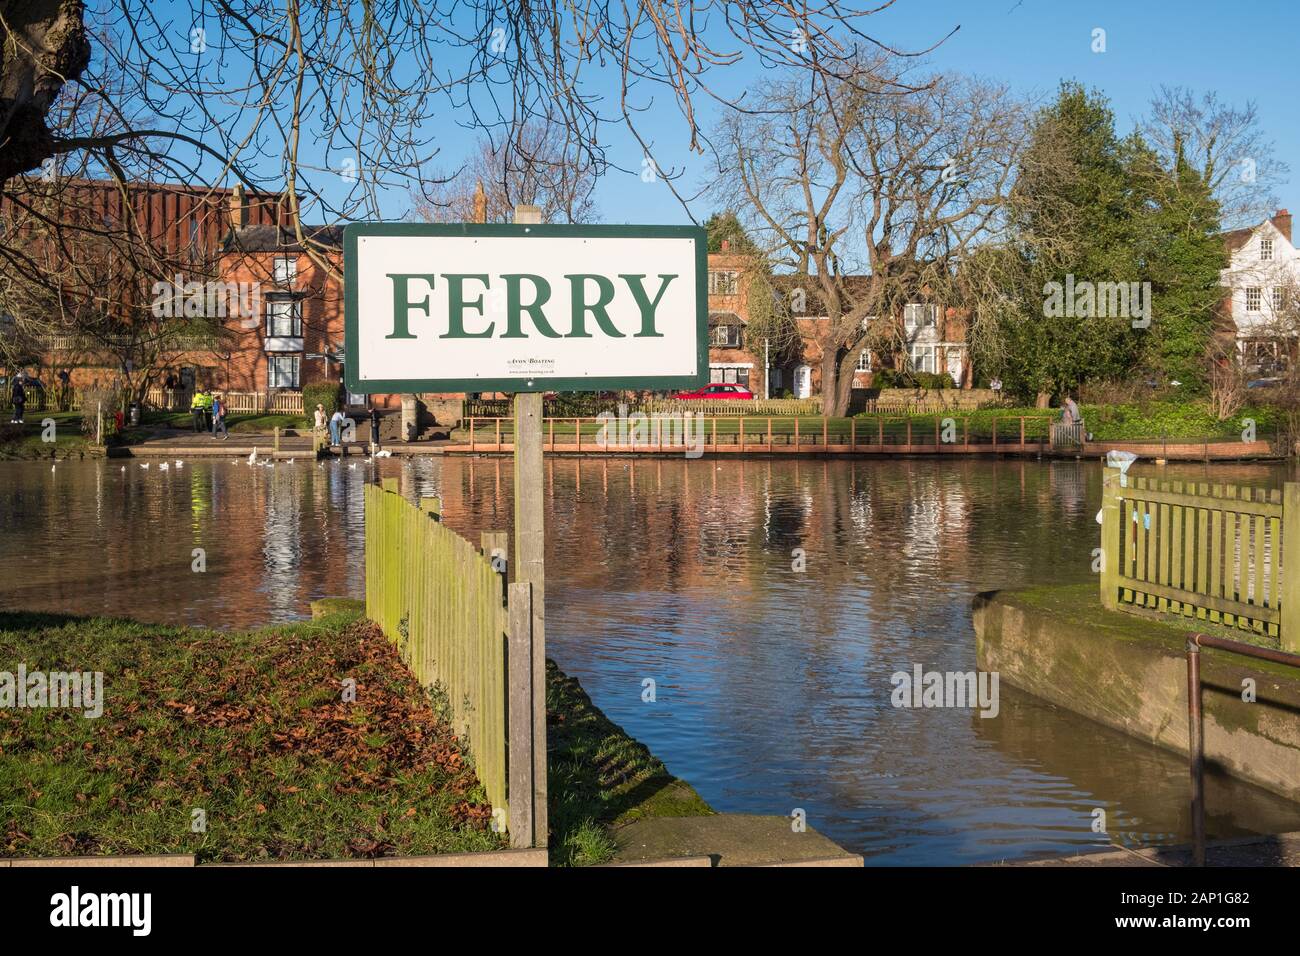 Sign for the Stratford Chain Ferry foot passenger ferry on the River Avon in Stratford-upon-Avon, Warwickshire, UK Stock Photo